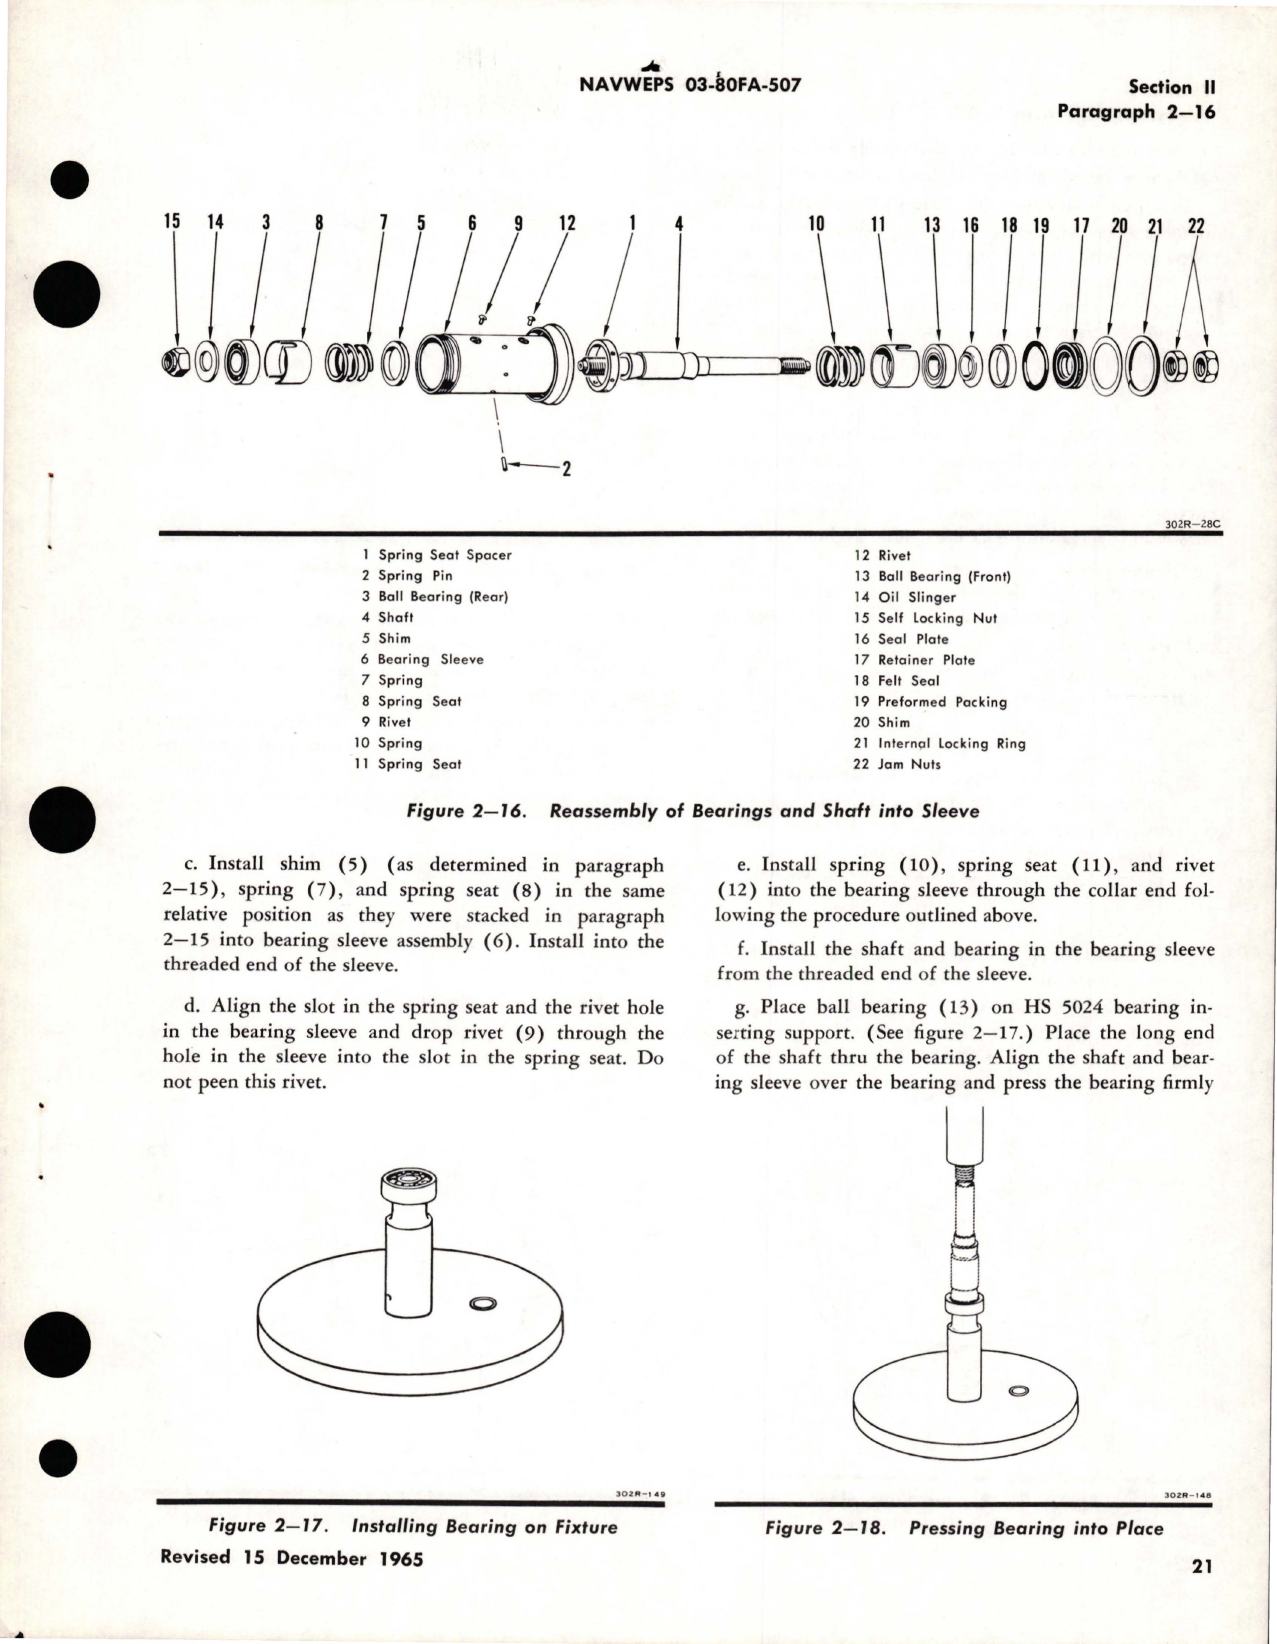 Sample page 7 from AirCorps Library document: Overhaul Instructions for Turbine Fan - Assemblies 519908, 519909, and 536928